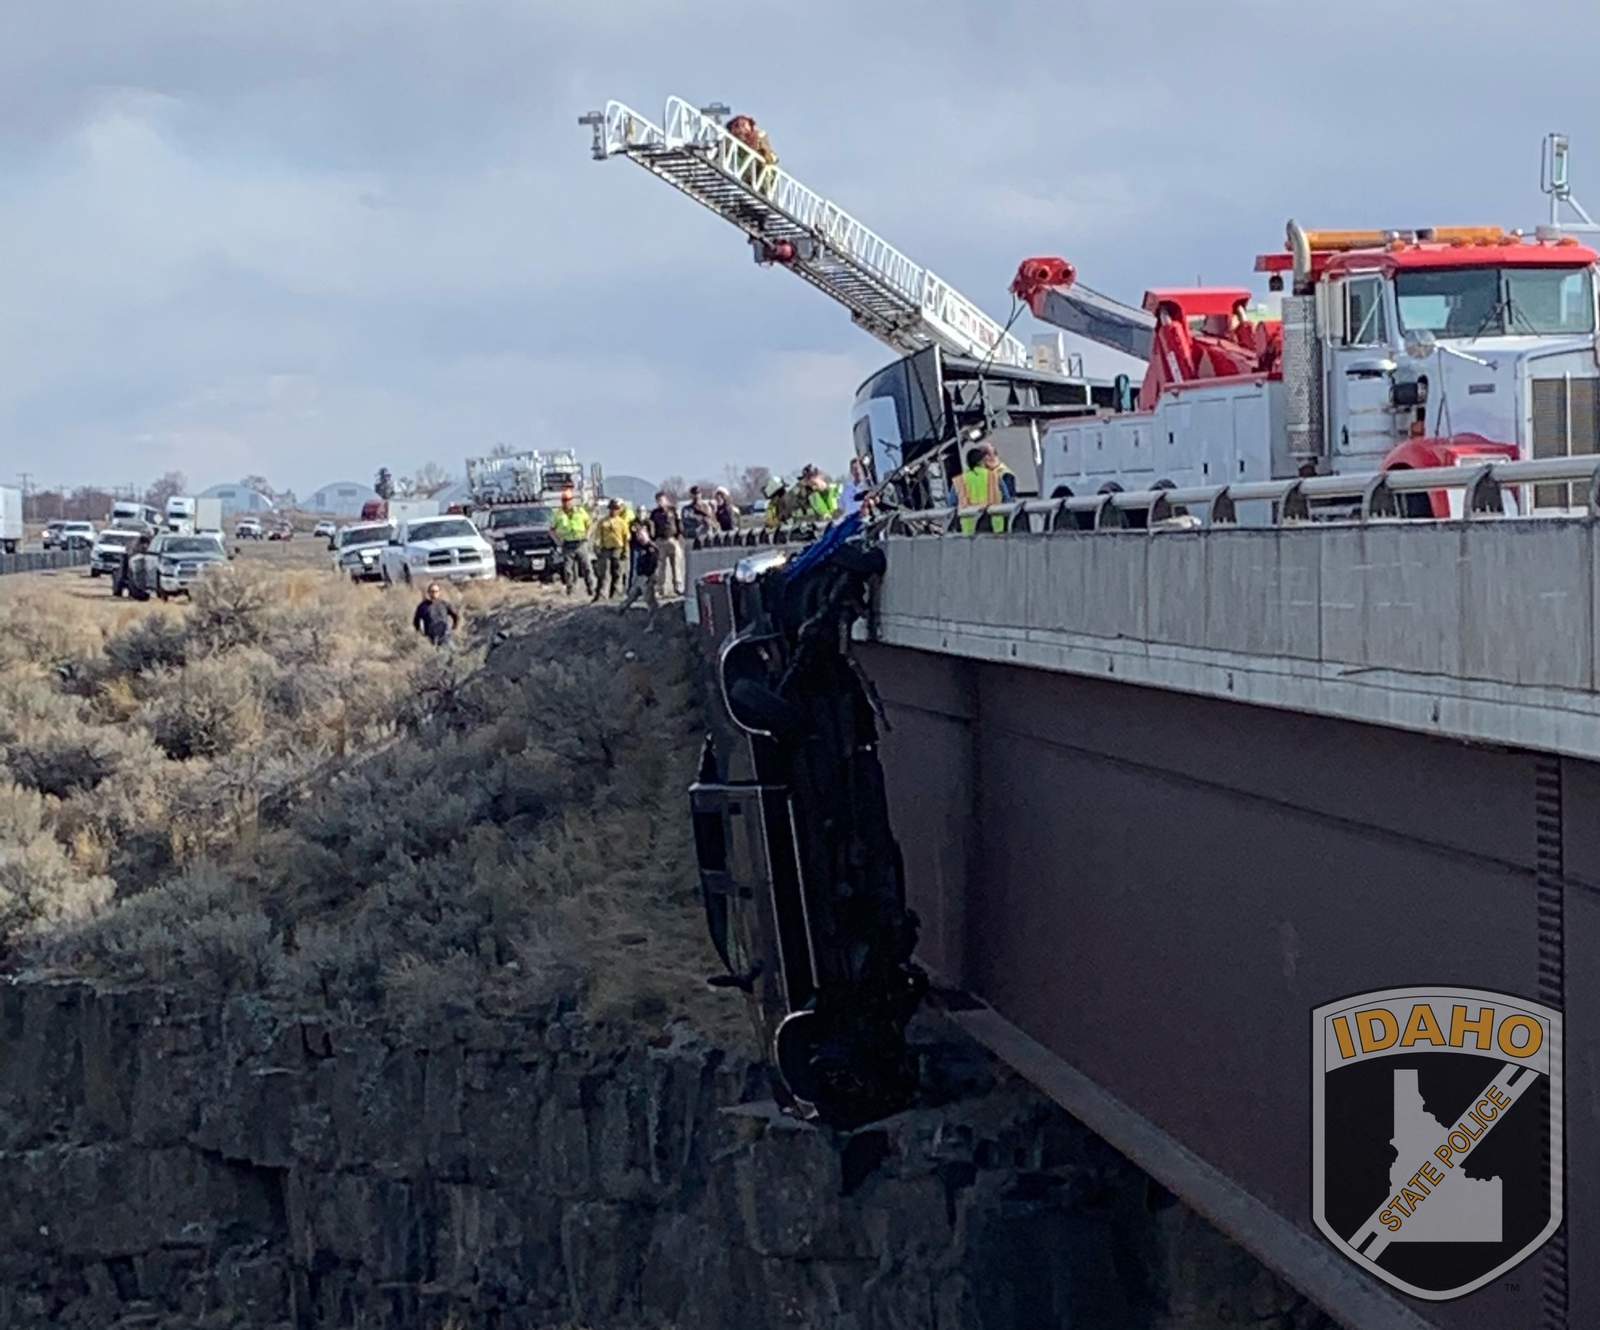 Rescuers save 2 from pickup dangling over deep Idaho gorge